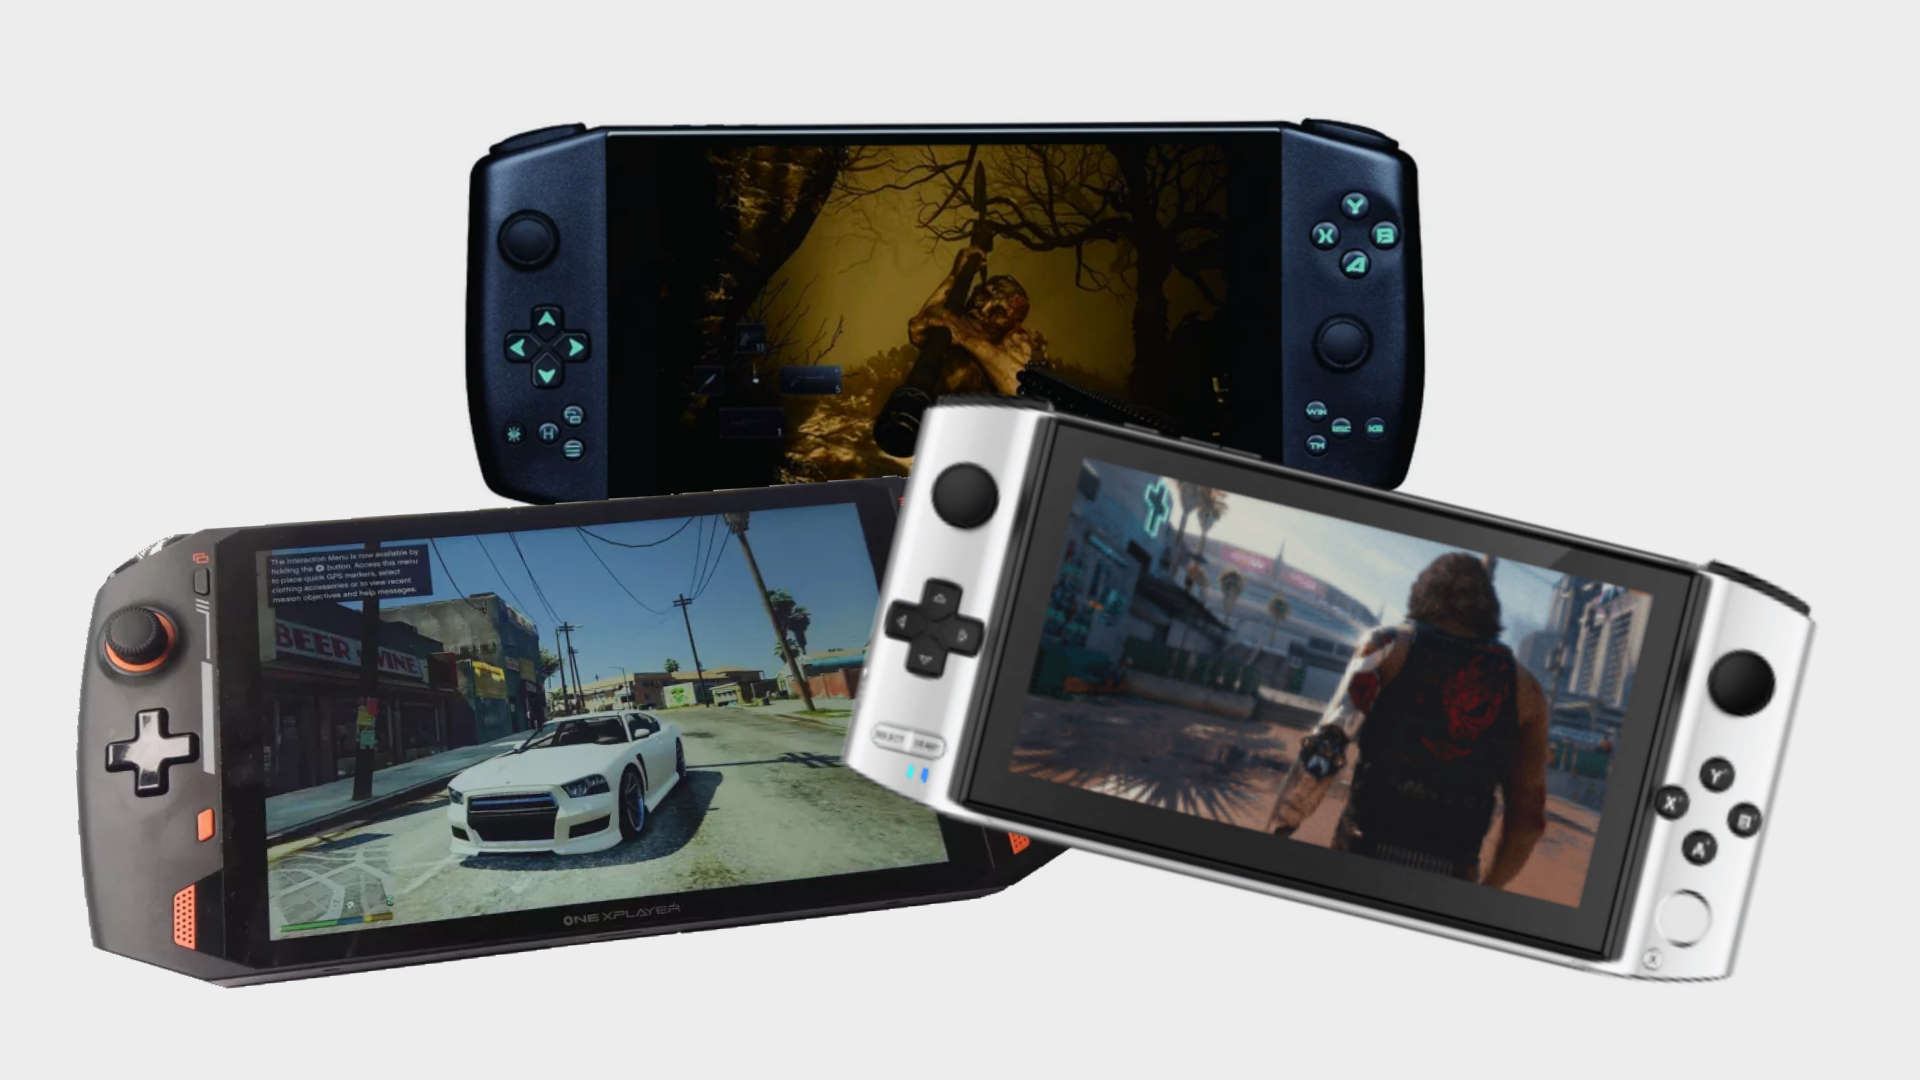 Missed early Steam Deck reservations? These are the best handheld PC gaming alternatives | PC